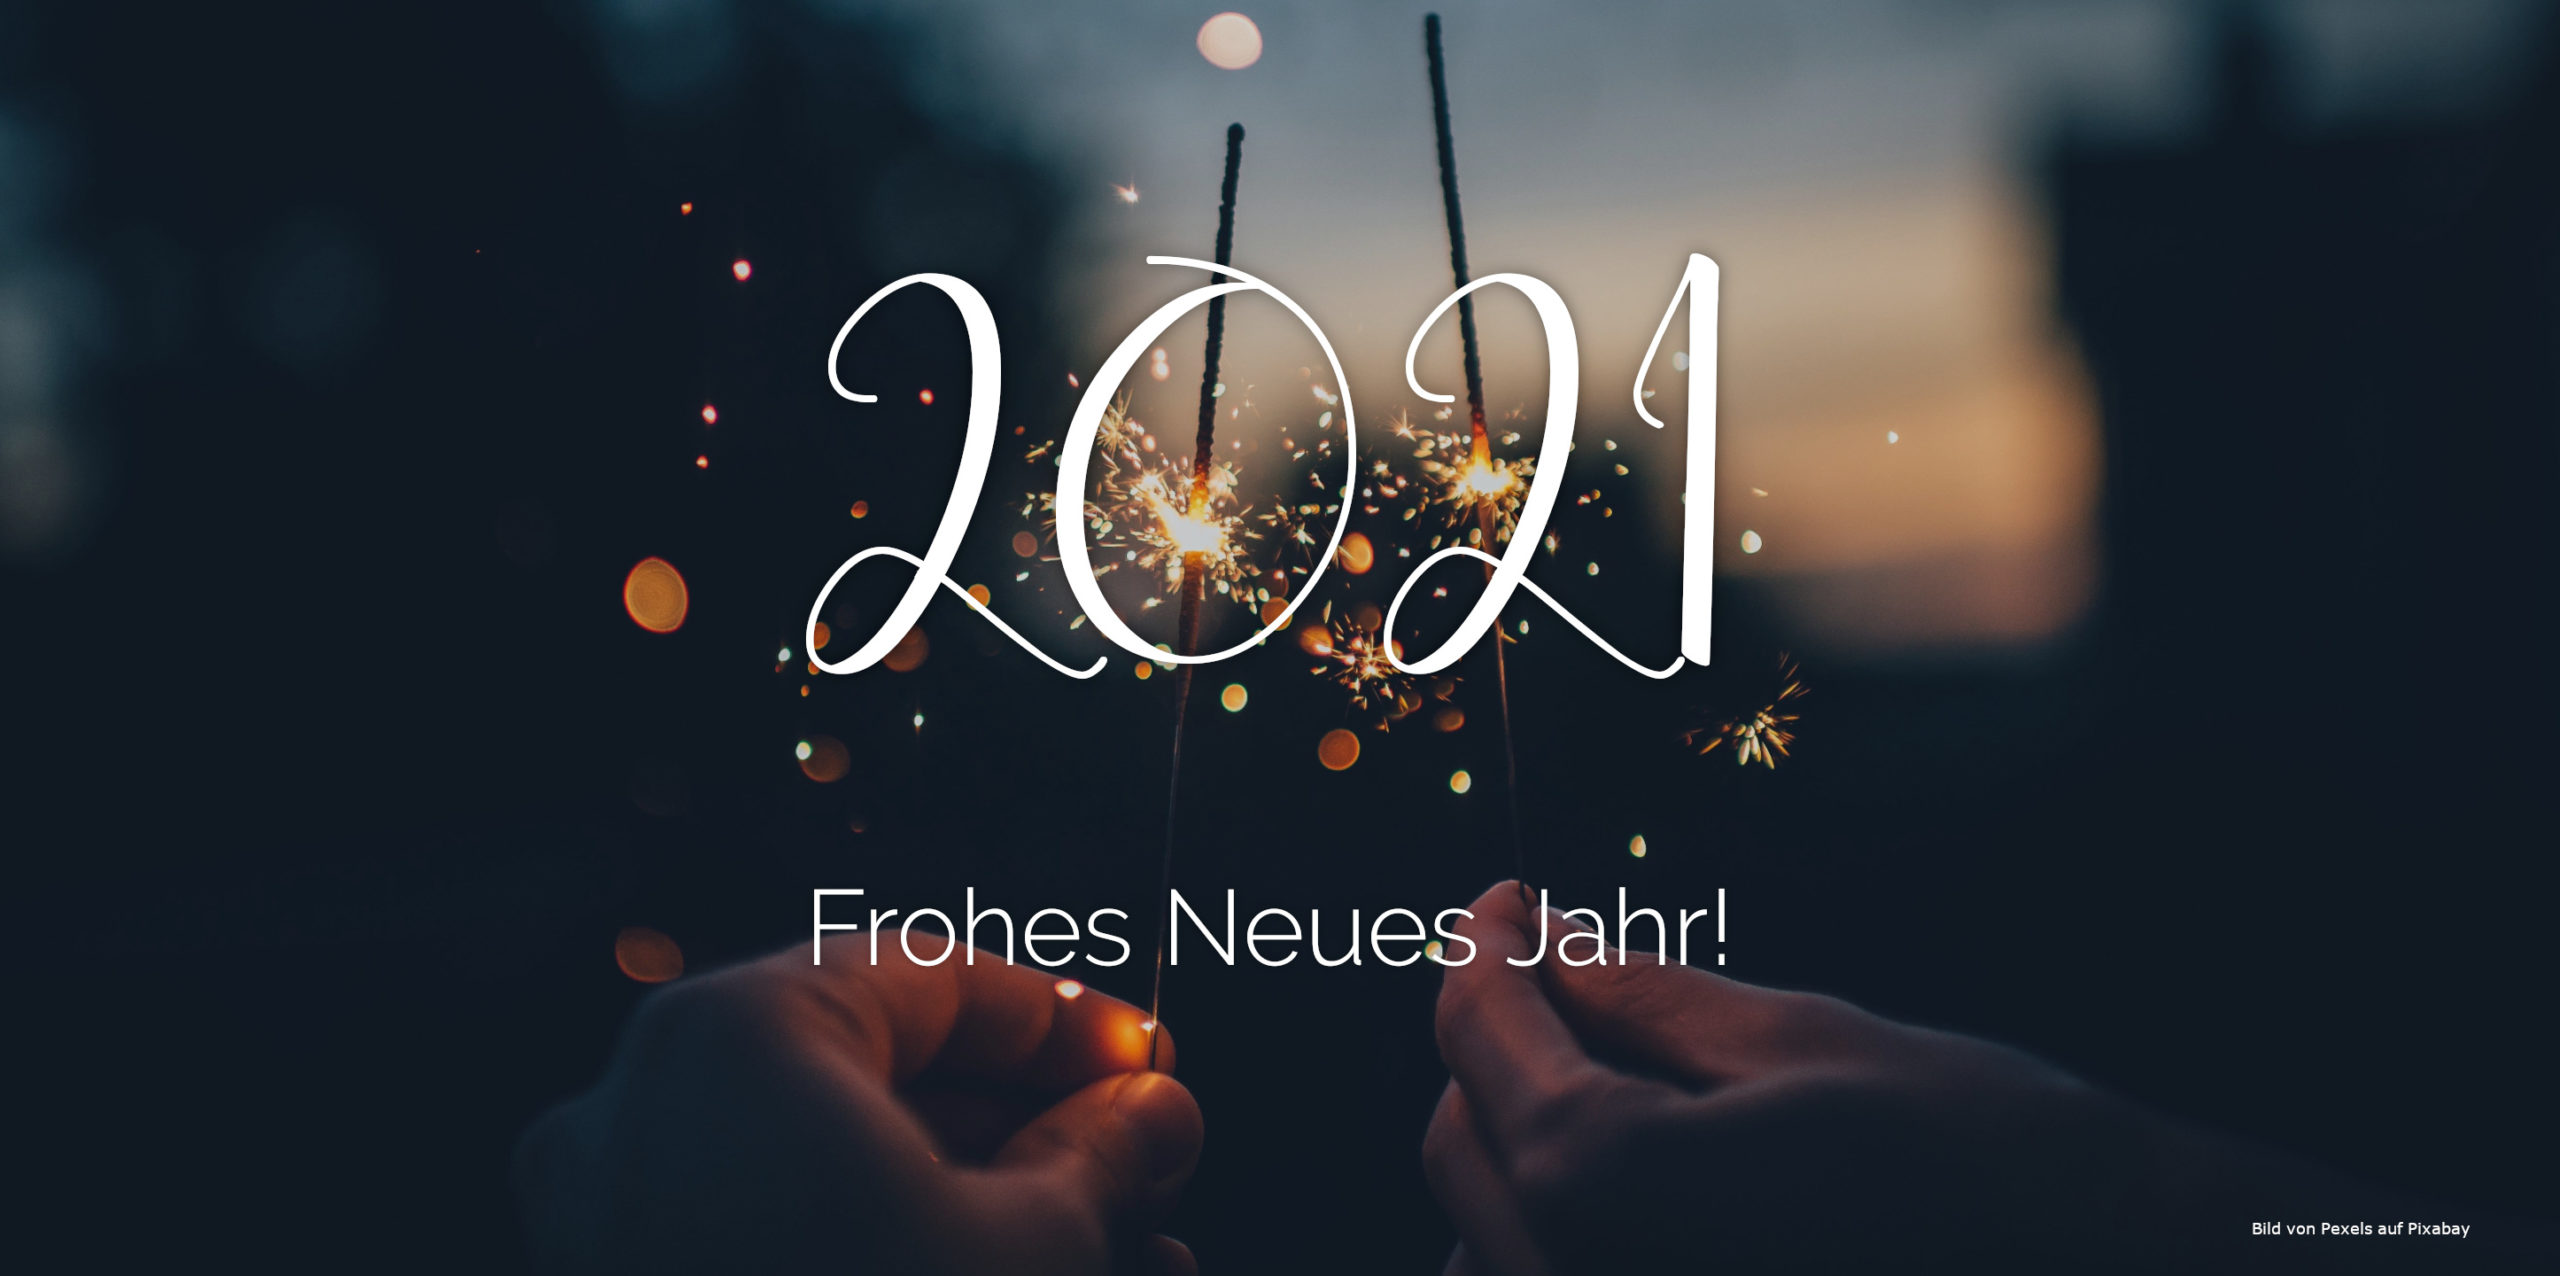 You are currently viewing Frohes Neues Jahr!